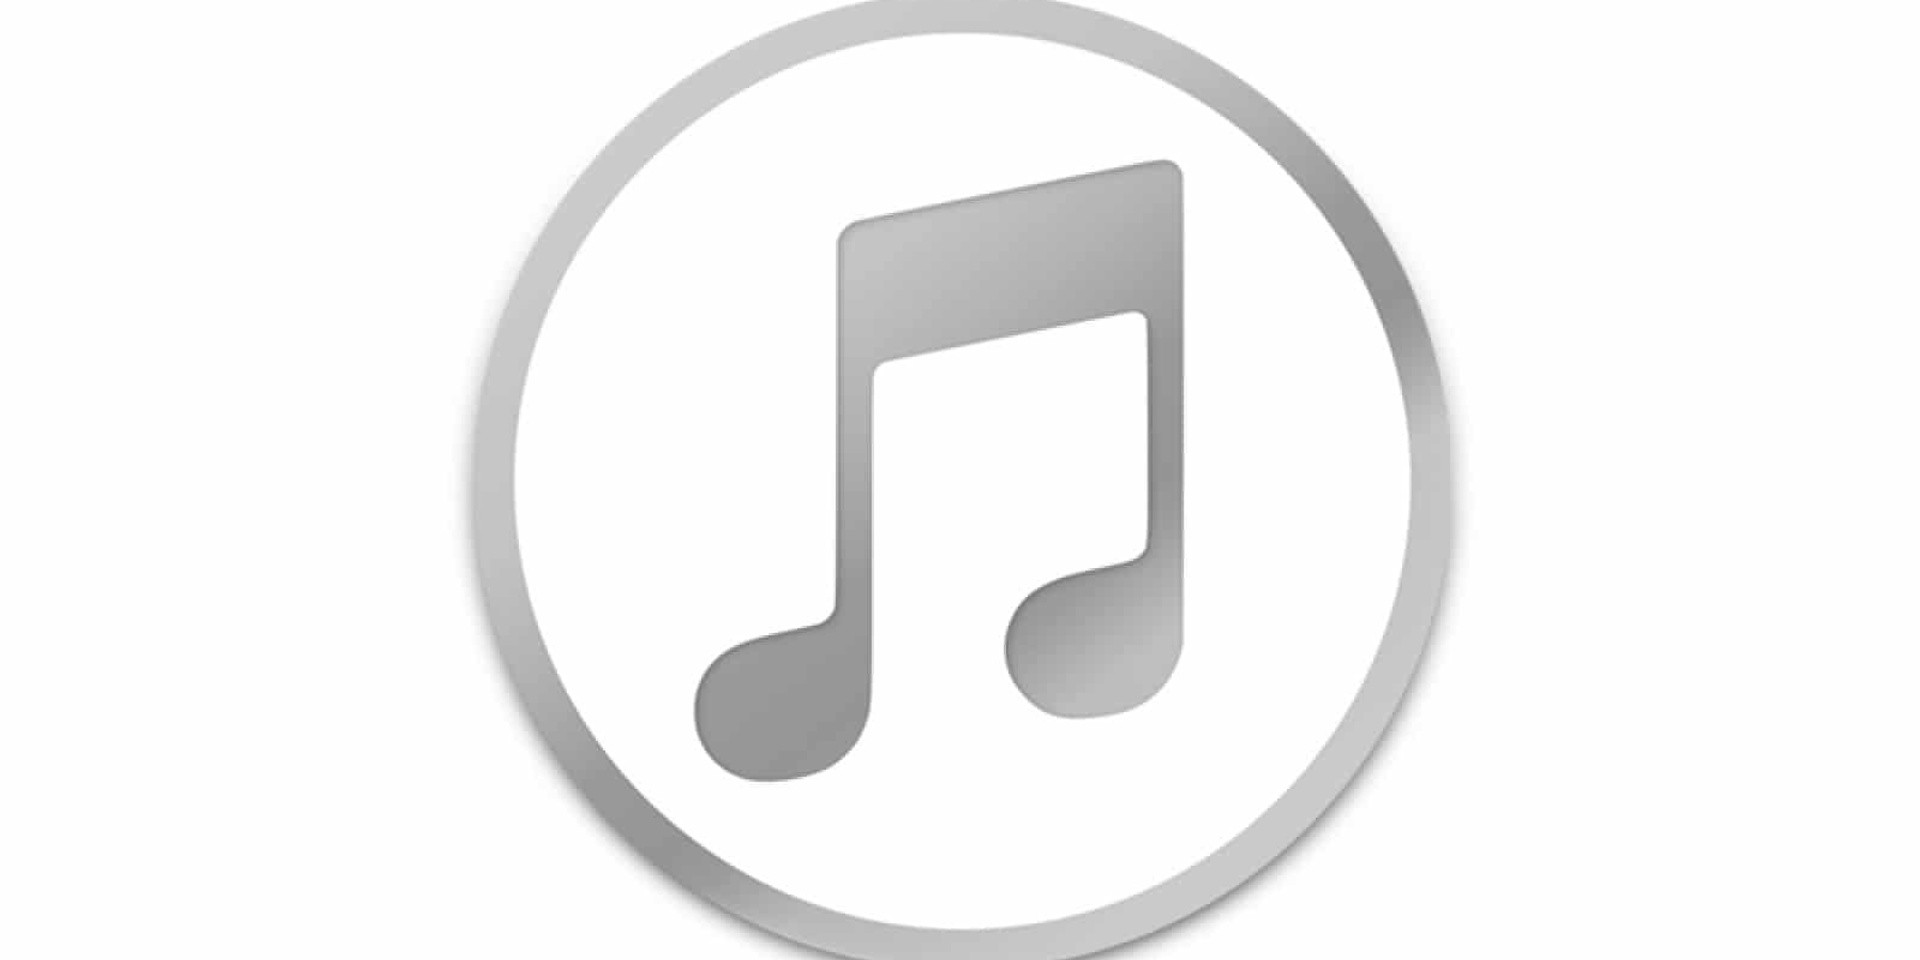 Apple phases out iTunes in latest Mac software update